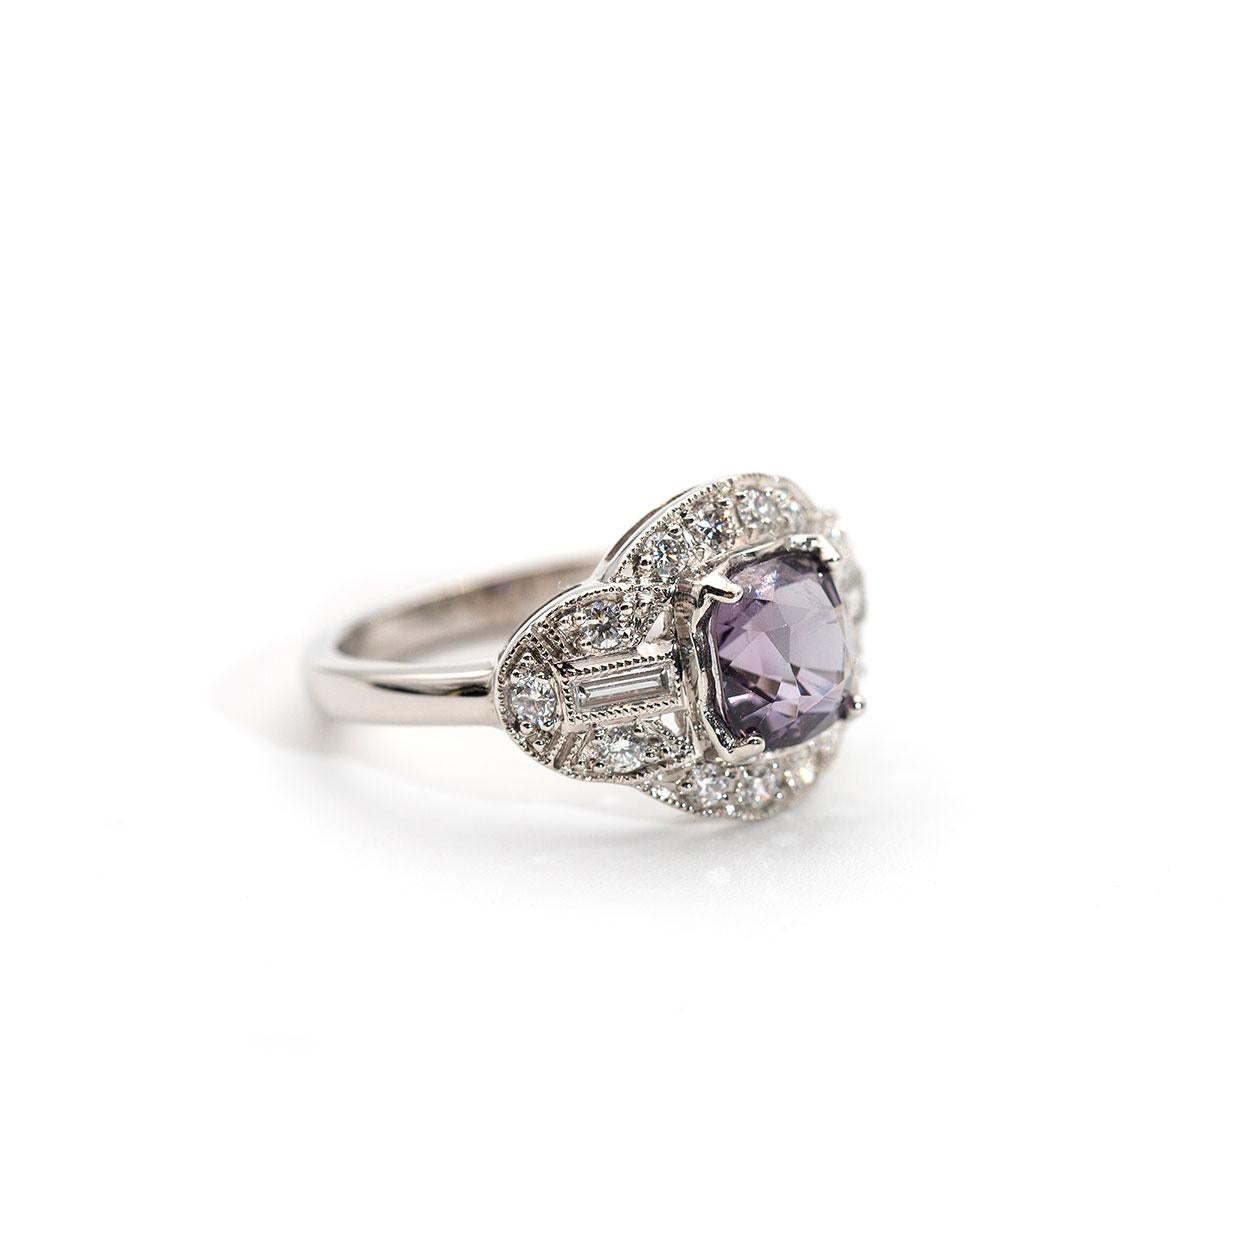 This vintage inspired spinel and diamond ring forged in platinum features an enchanting 1.82 carat greyish purple cushion cut spinel and is circled by a total 0.40 carats of round brilliant cut diamonds and baguette cut diamonds. We have named this